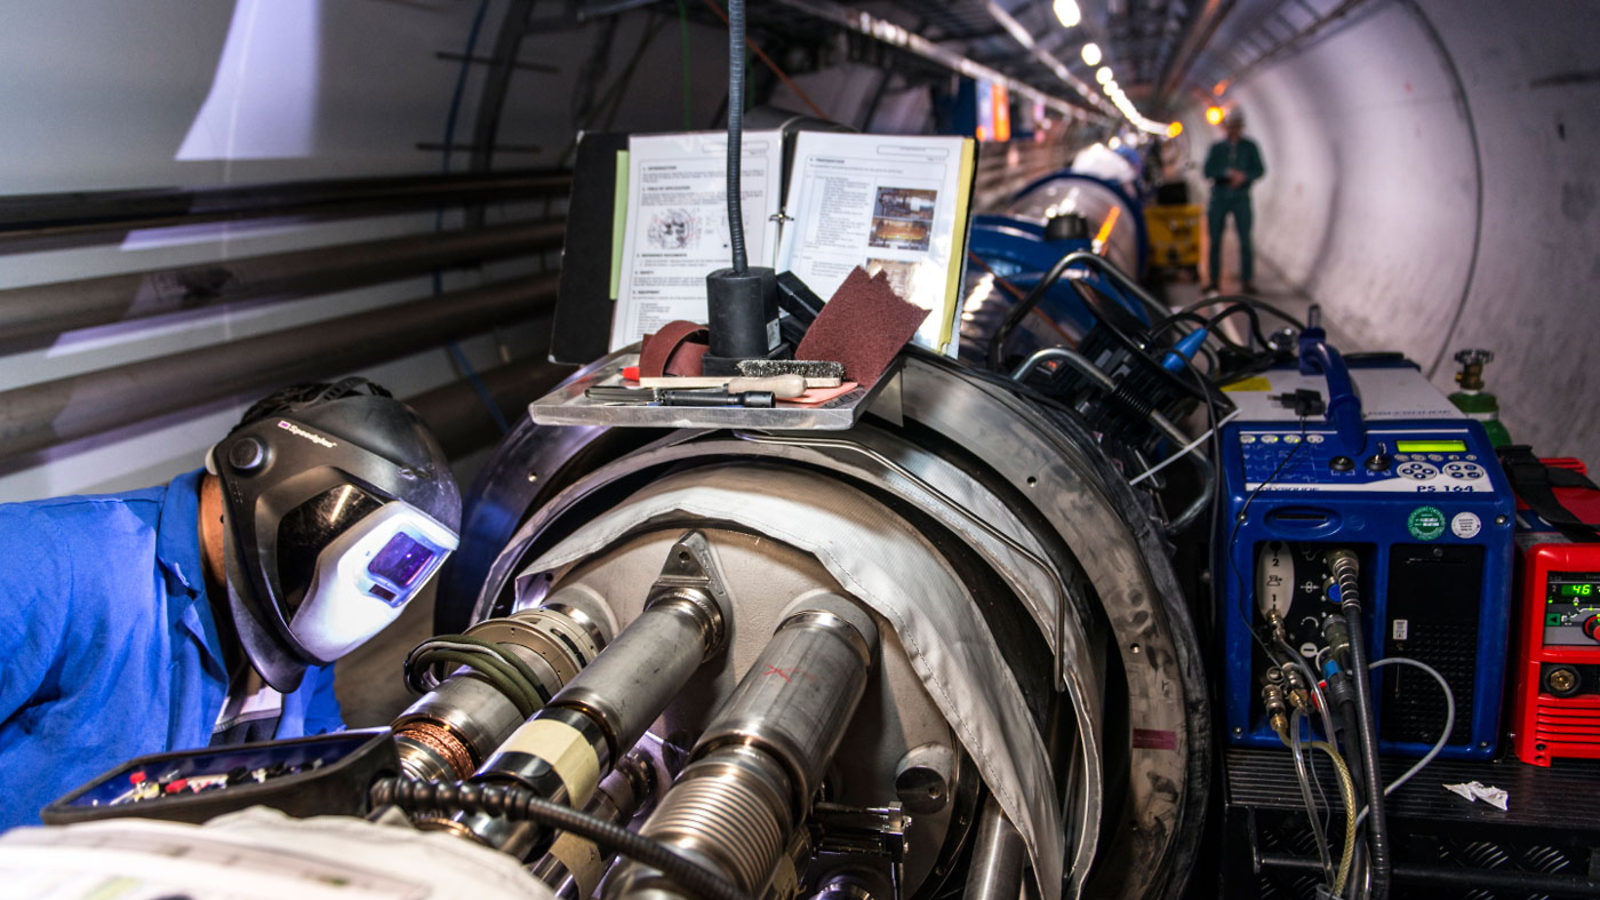 Maintenance workers working on LHC Accelerator